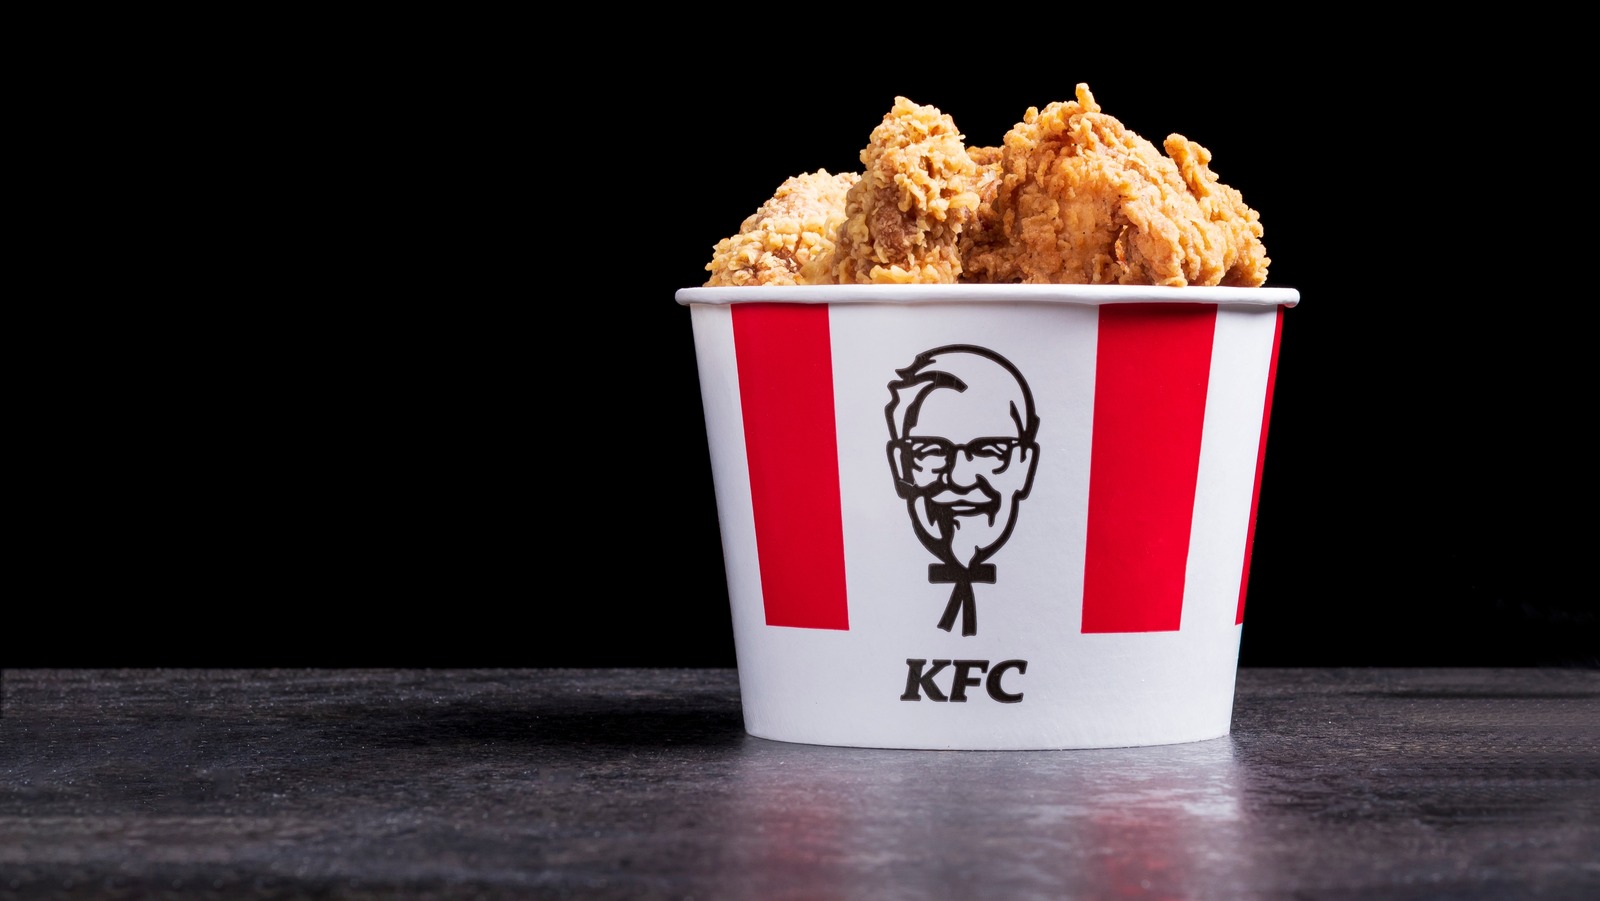 Why These KFC Items Didn't Last